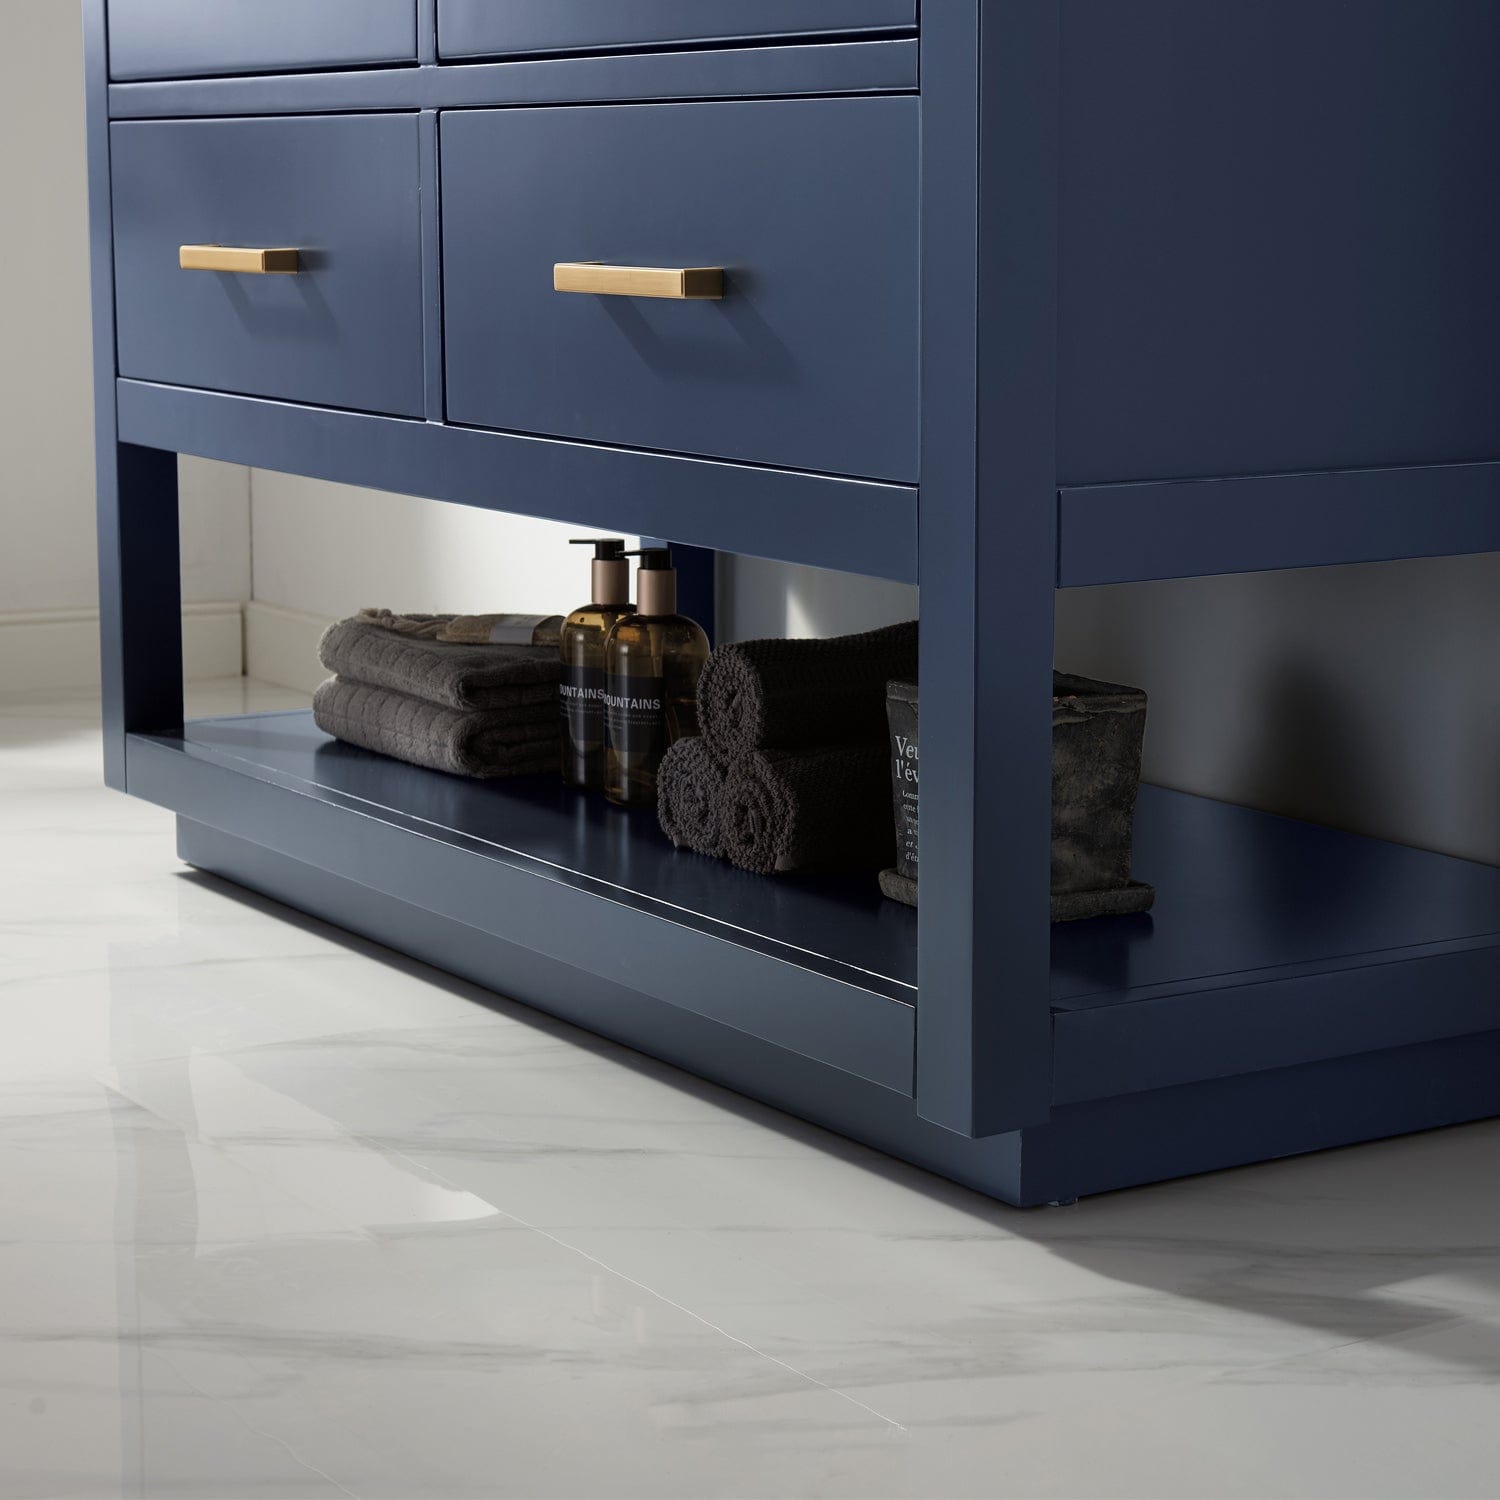 Altair Remi 48" Single Bathroom Vanity Set in Royal Blue and Carrara White Marble Countertop without Mirror 532048-RB-CA-NM - Molaix631112971485Vanity532048-RB-CA-NM